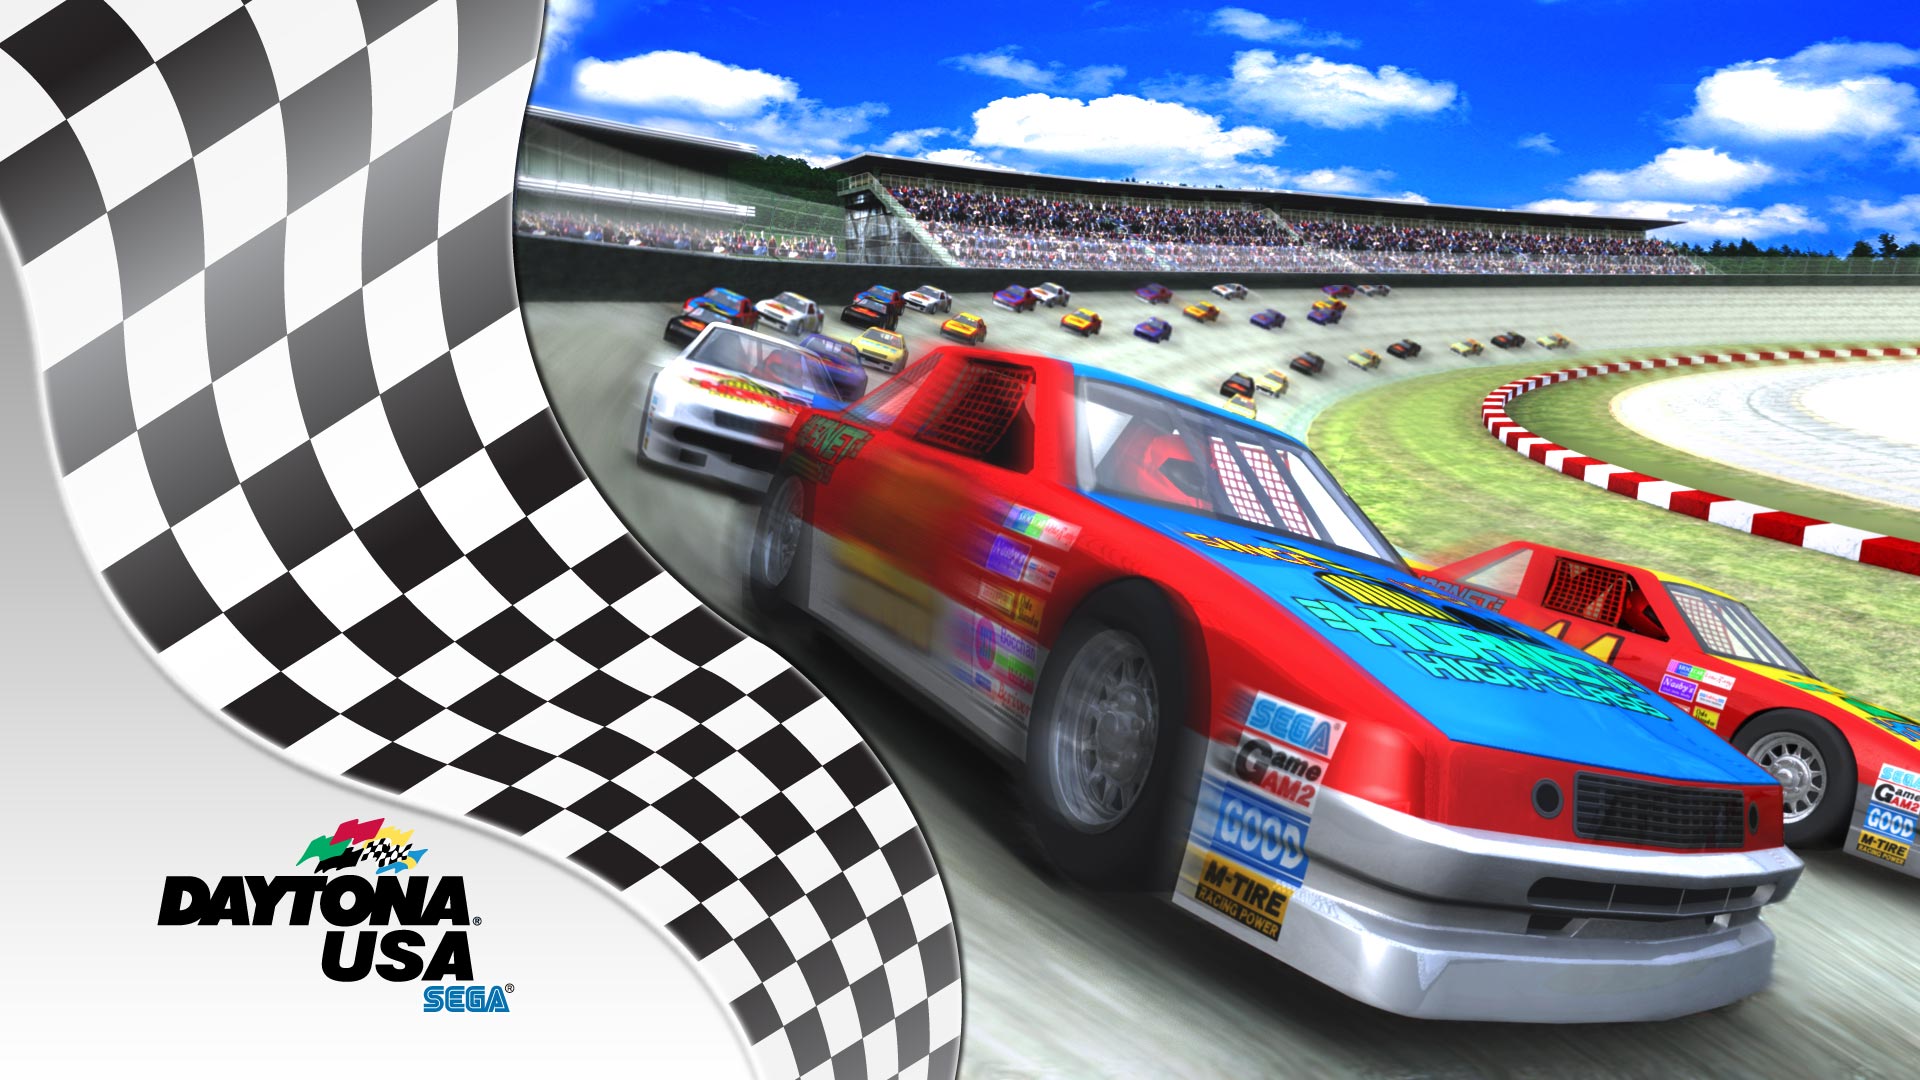 Image for Daytona USA was one of the miracles of the XBLA era, so grab it while you can